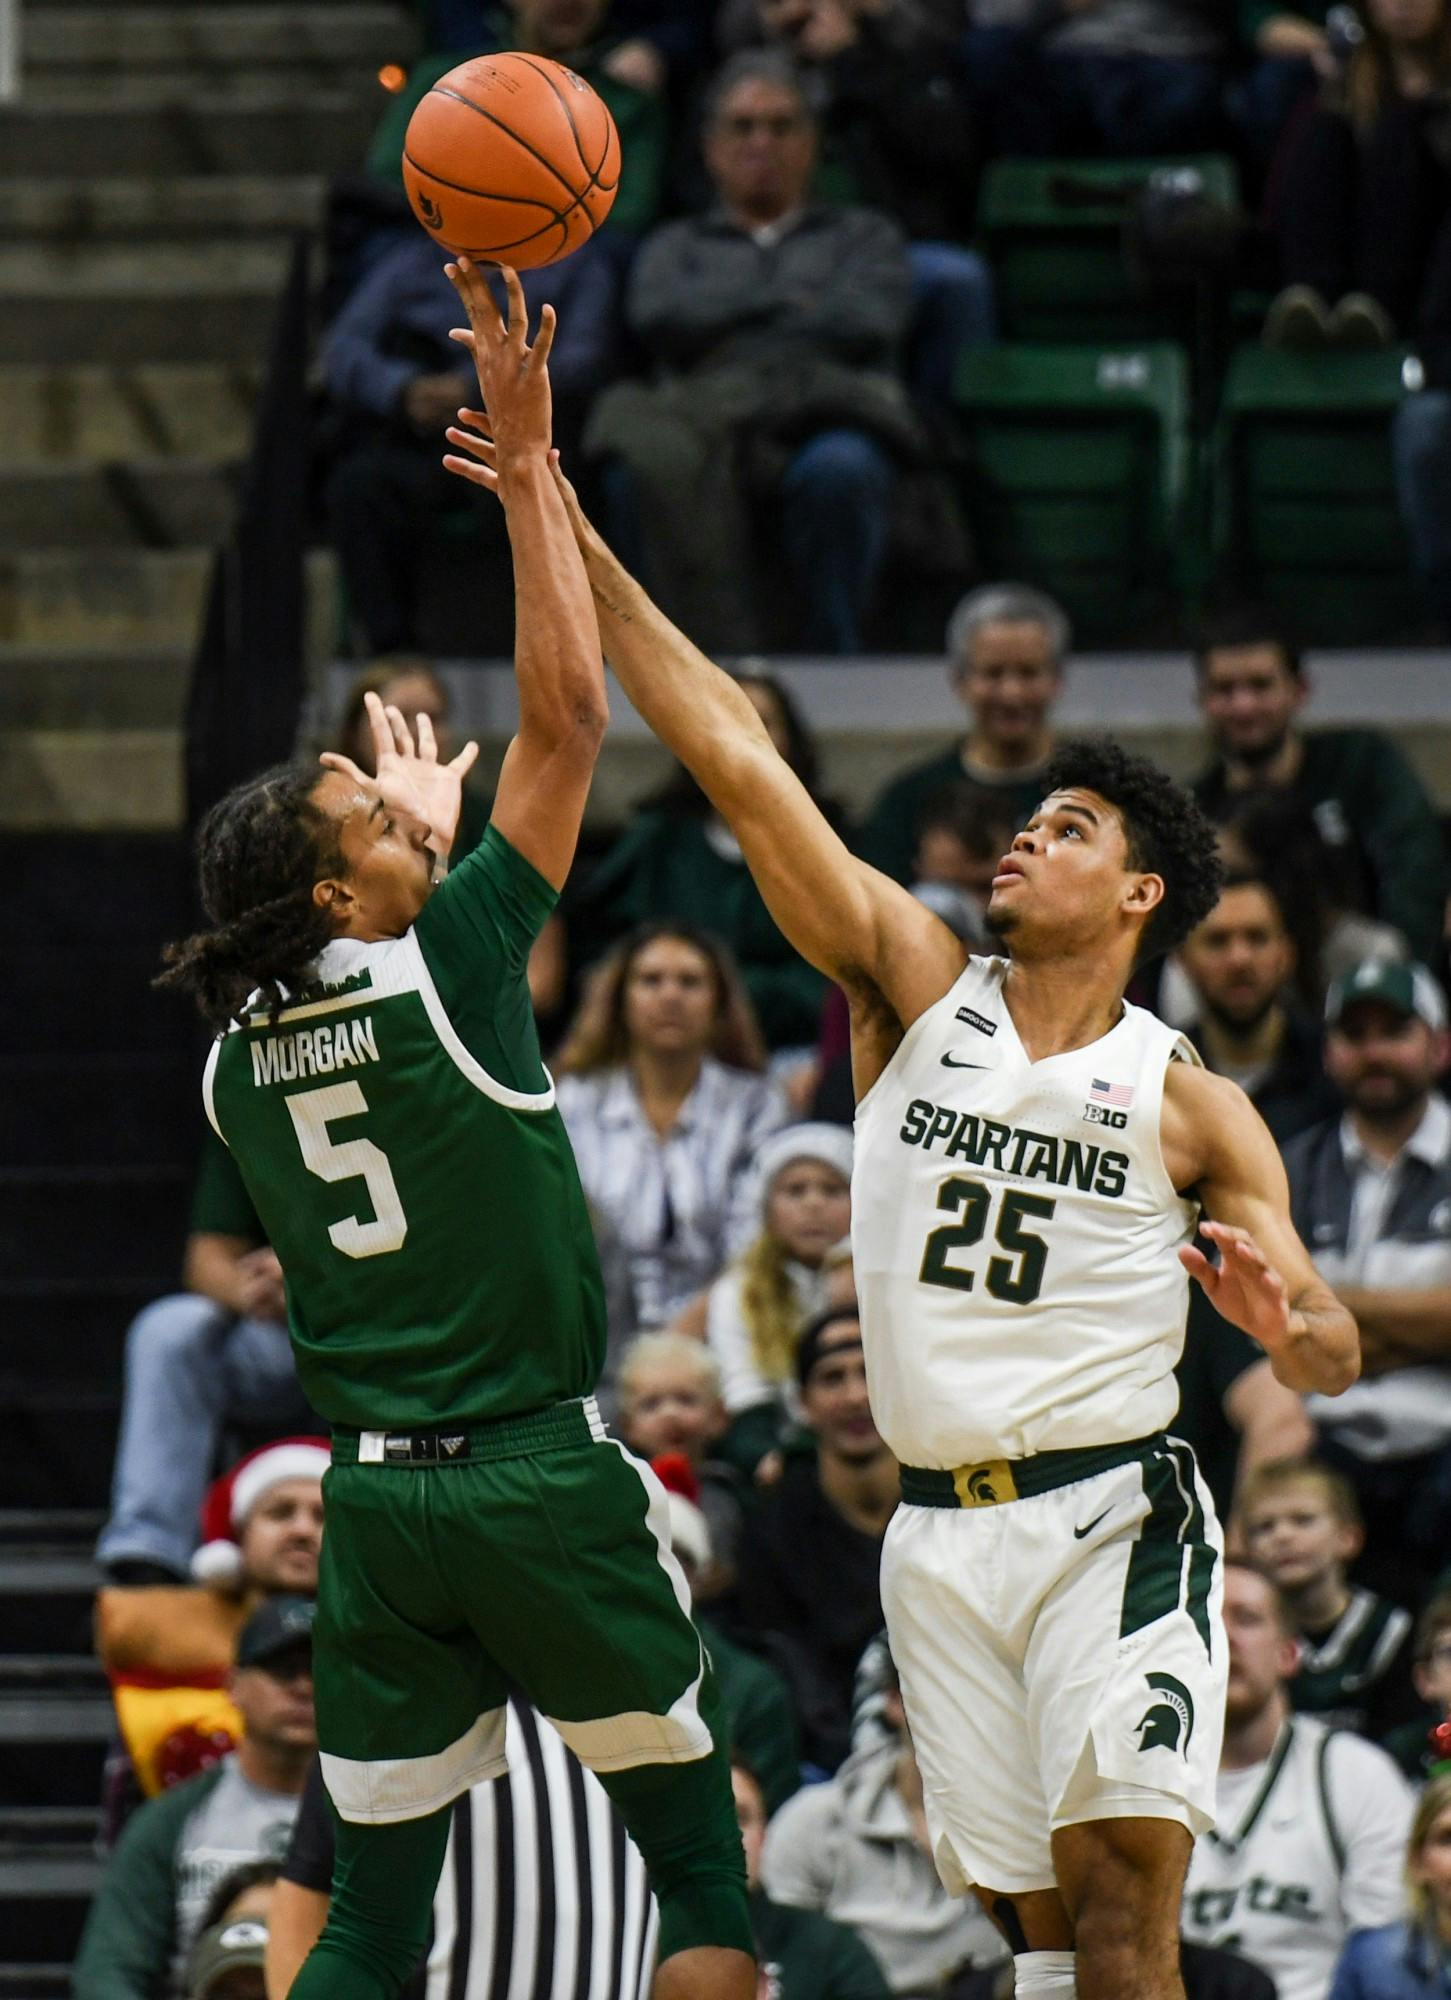 <p>Then-freshman forward Malik Hall (25) contests a shot during the game against Eastern Michigan on Dec. 21, 2019, at the Breslin Center. The Spartans defeated the Eagles, 101-48.</p>